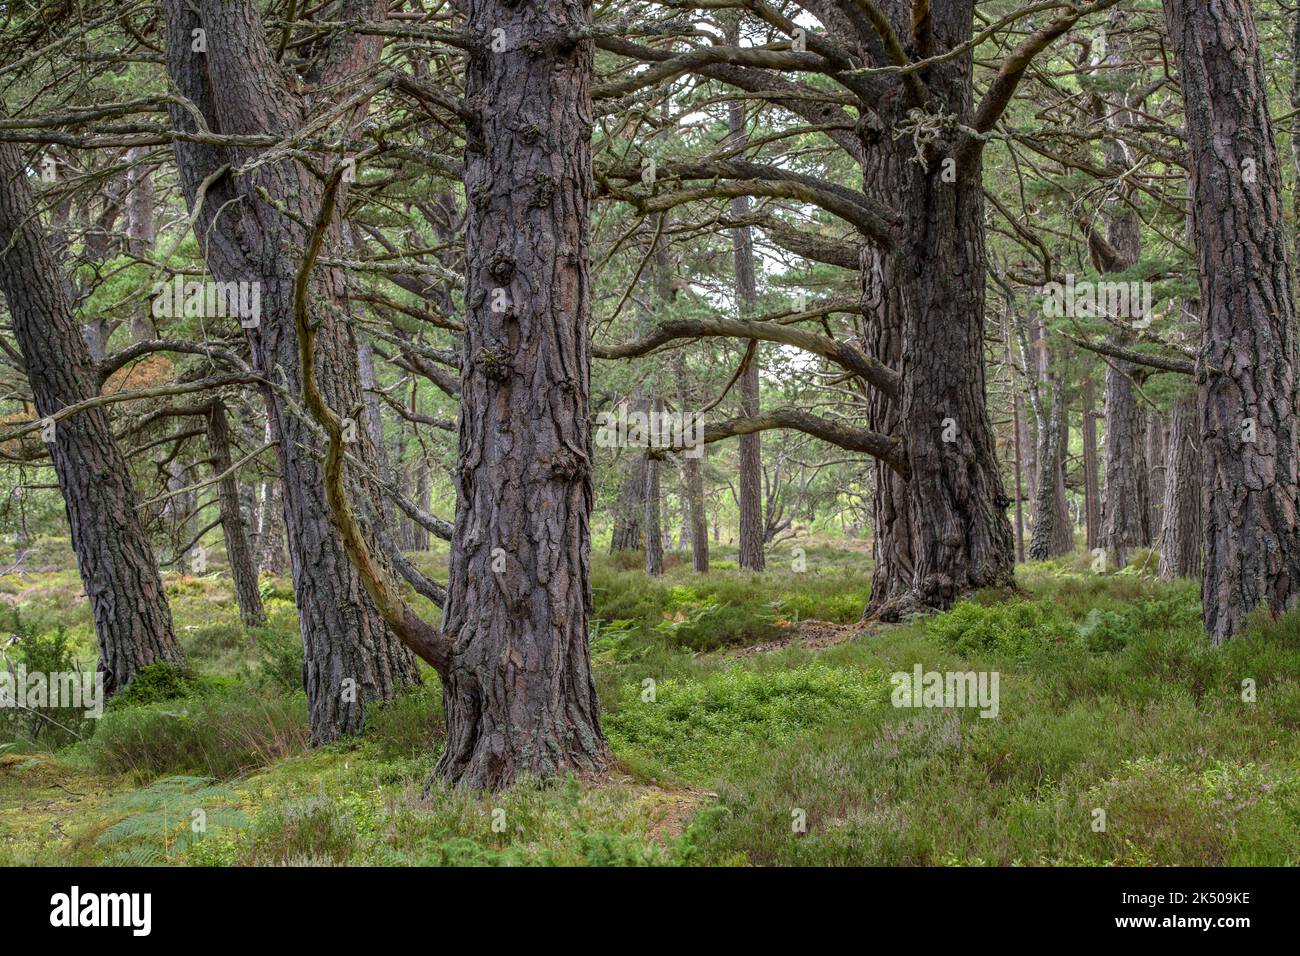 Old Growth Pines Scozzese in Caledonian Pine Forest, Rothiemurchus Estate. Speyside, Cairngorms, Scozia. Foto Stock